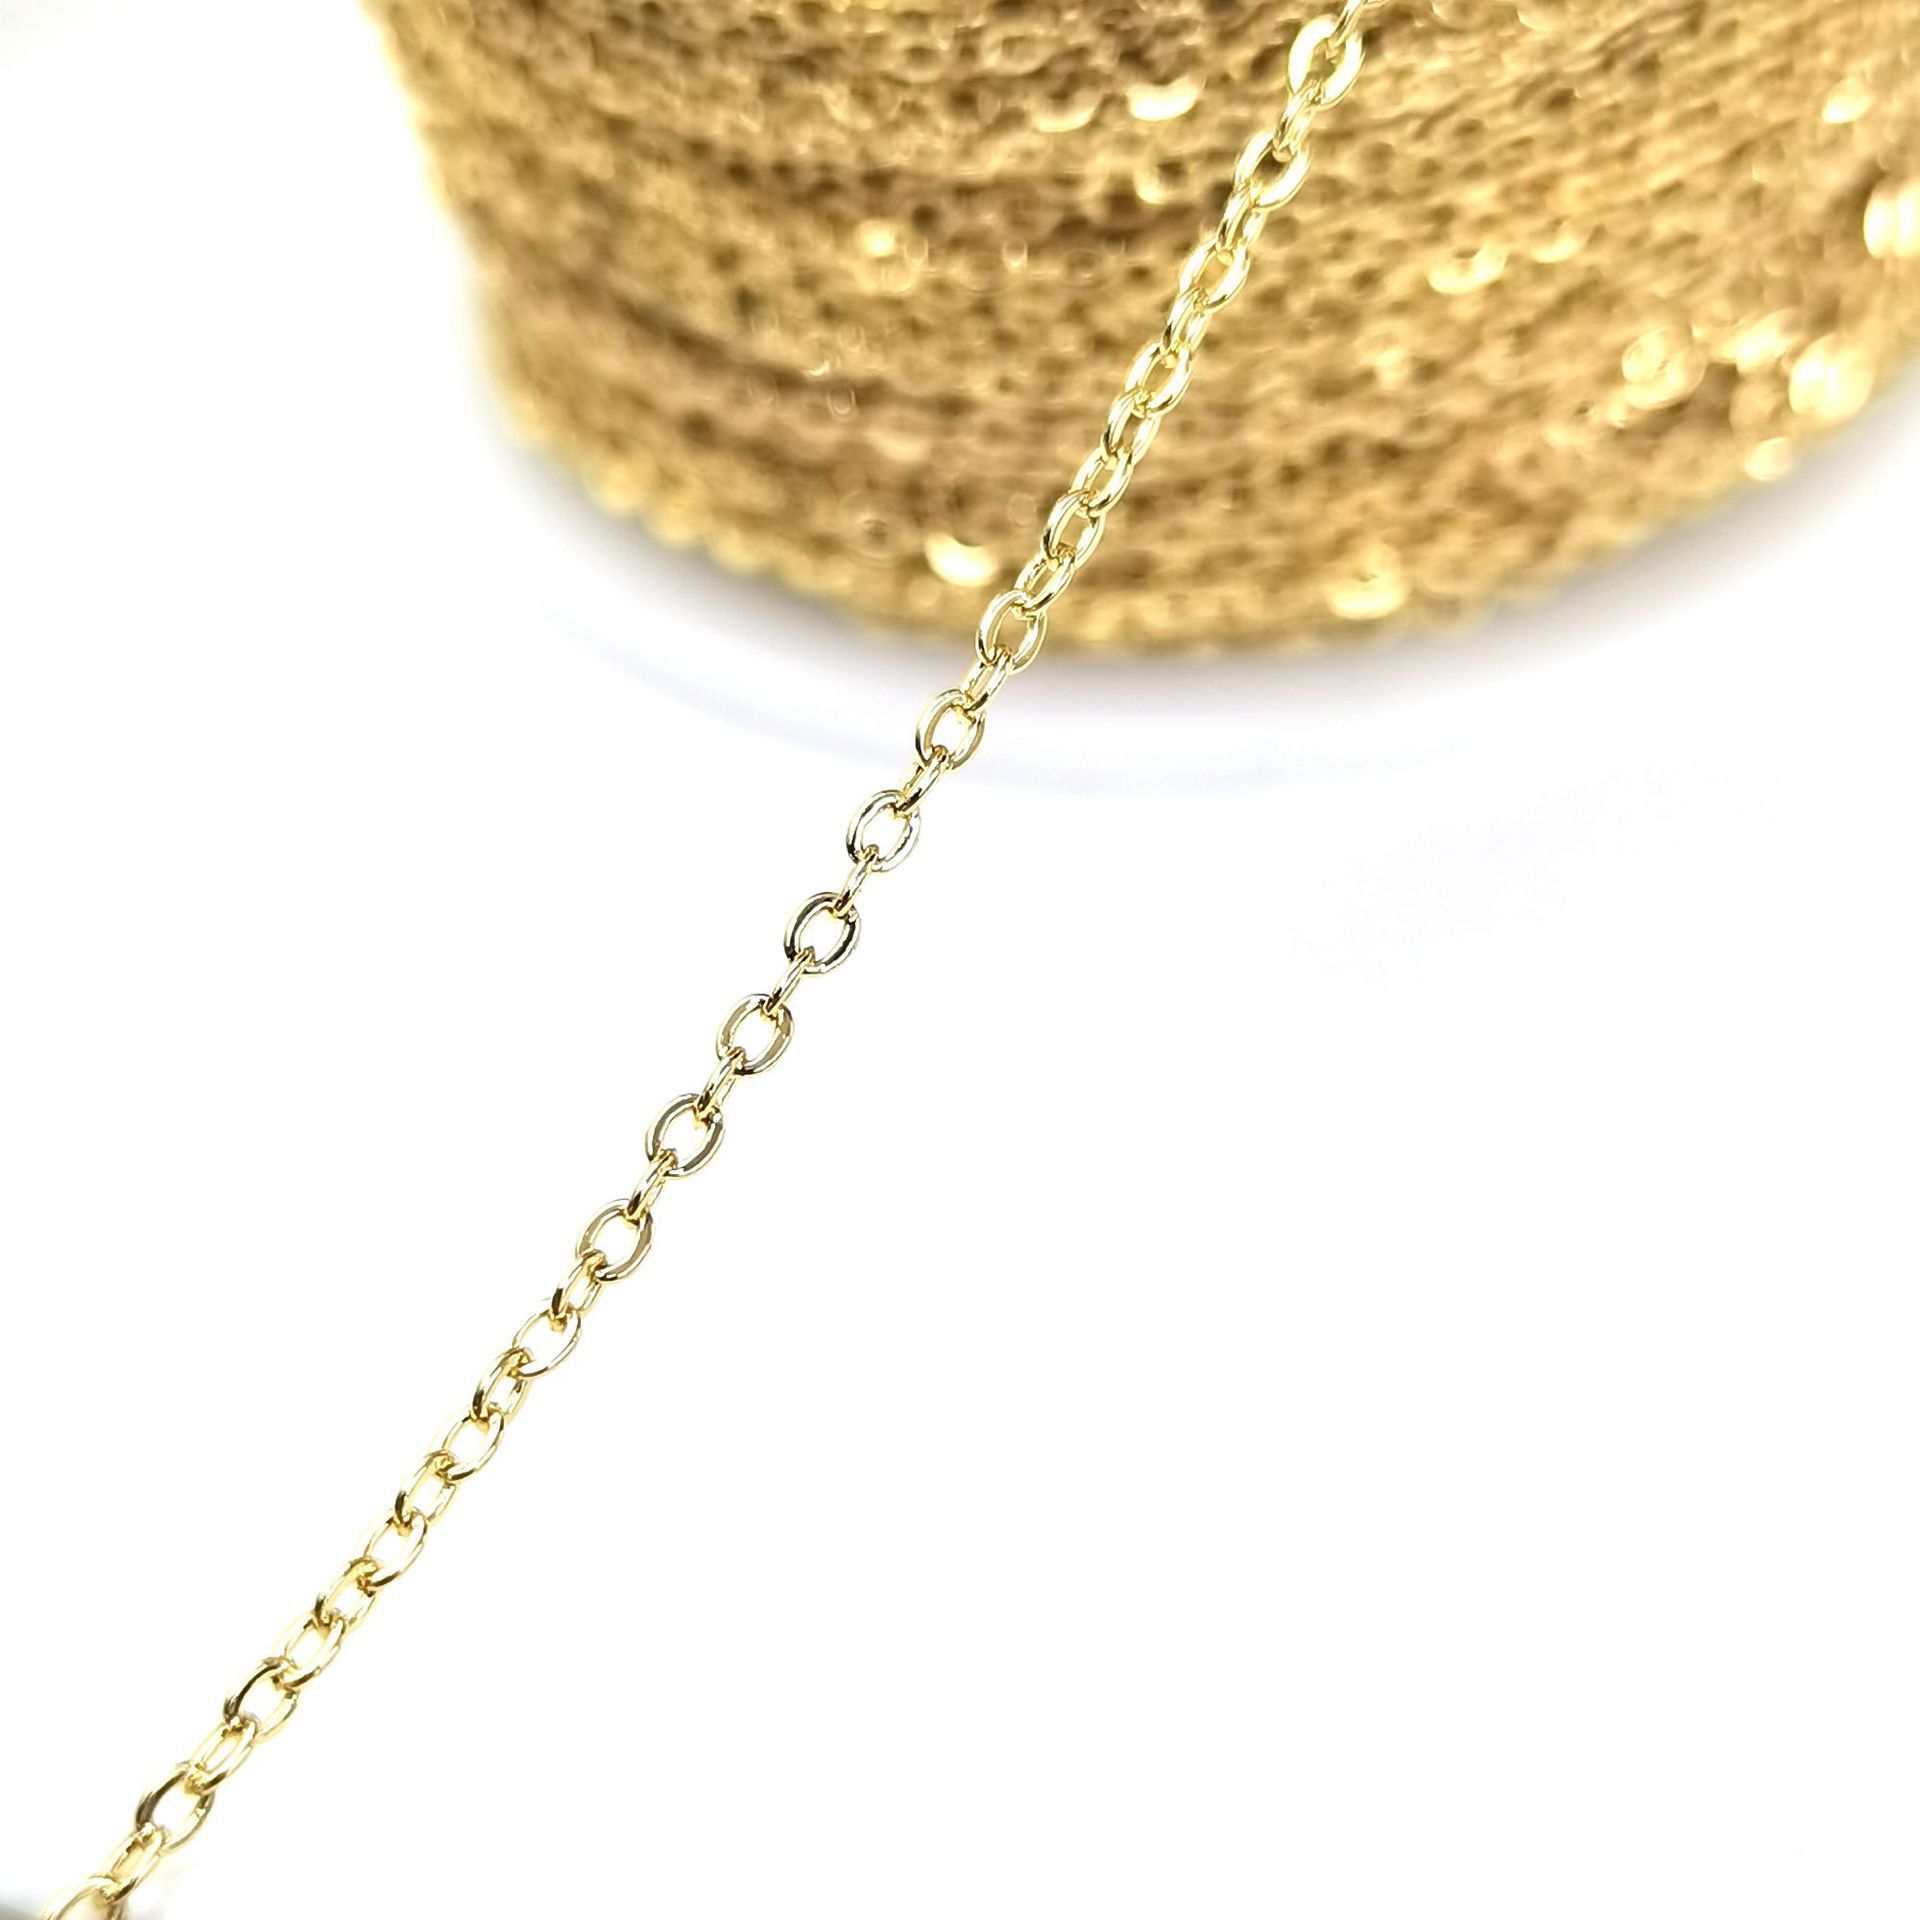 3ft (1.2mm) 14gold